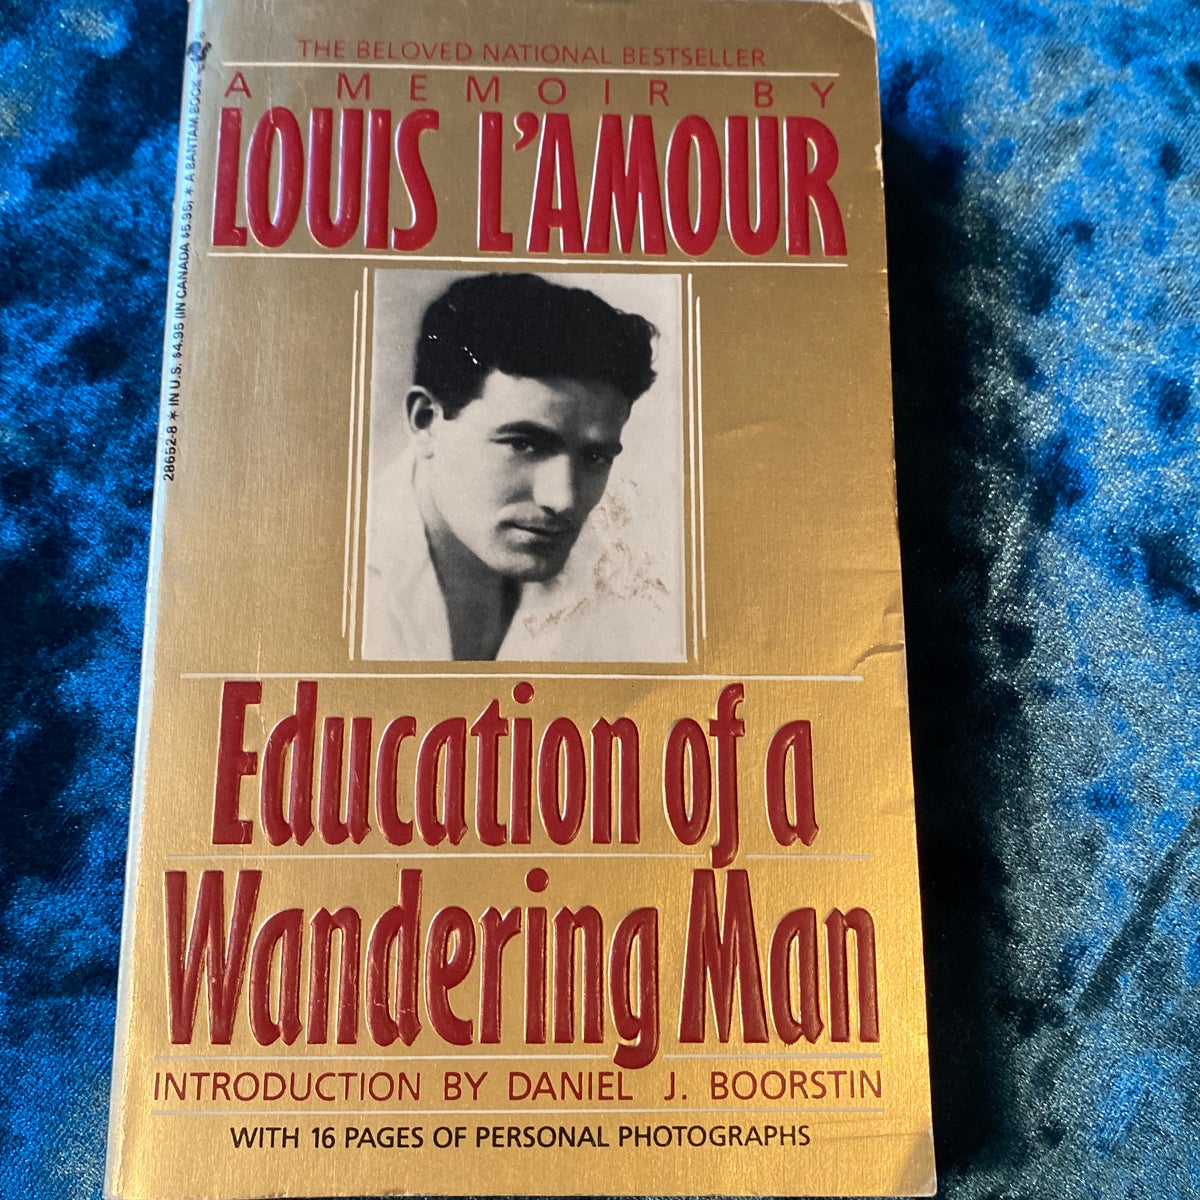 Education of a Wandering Man [Book]